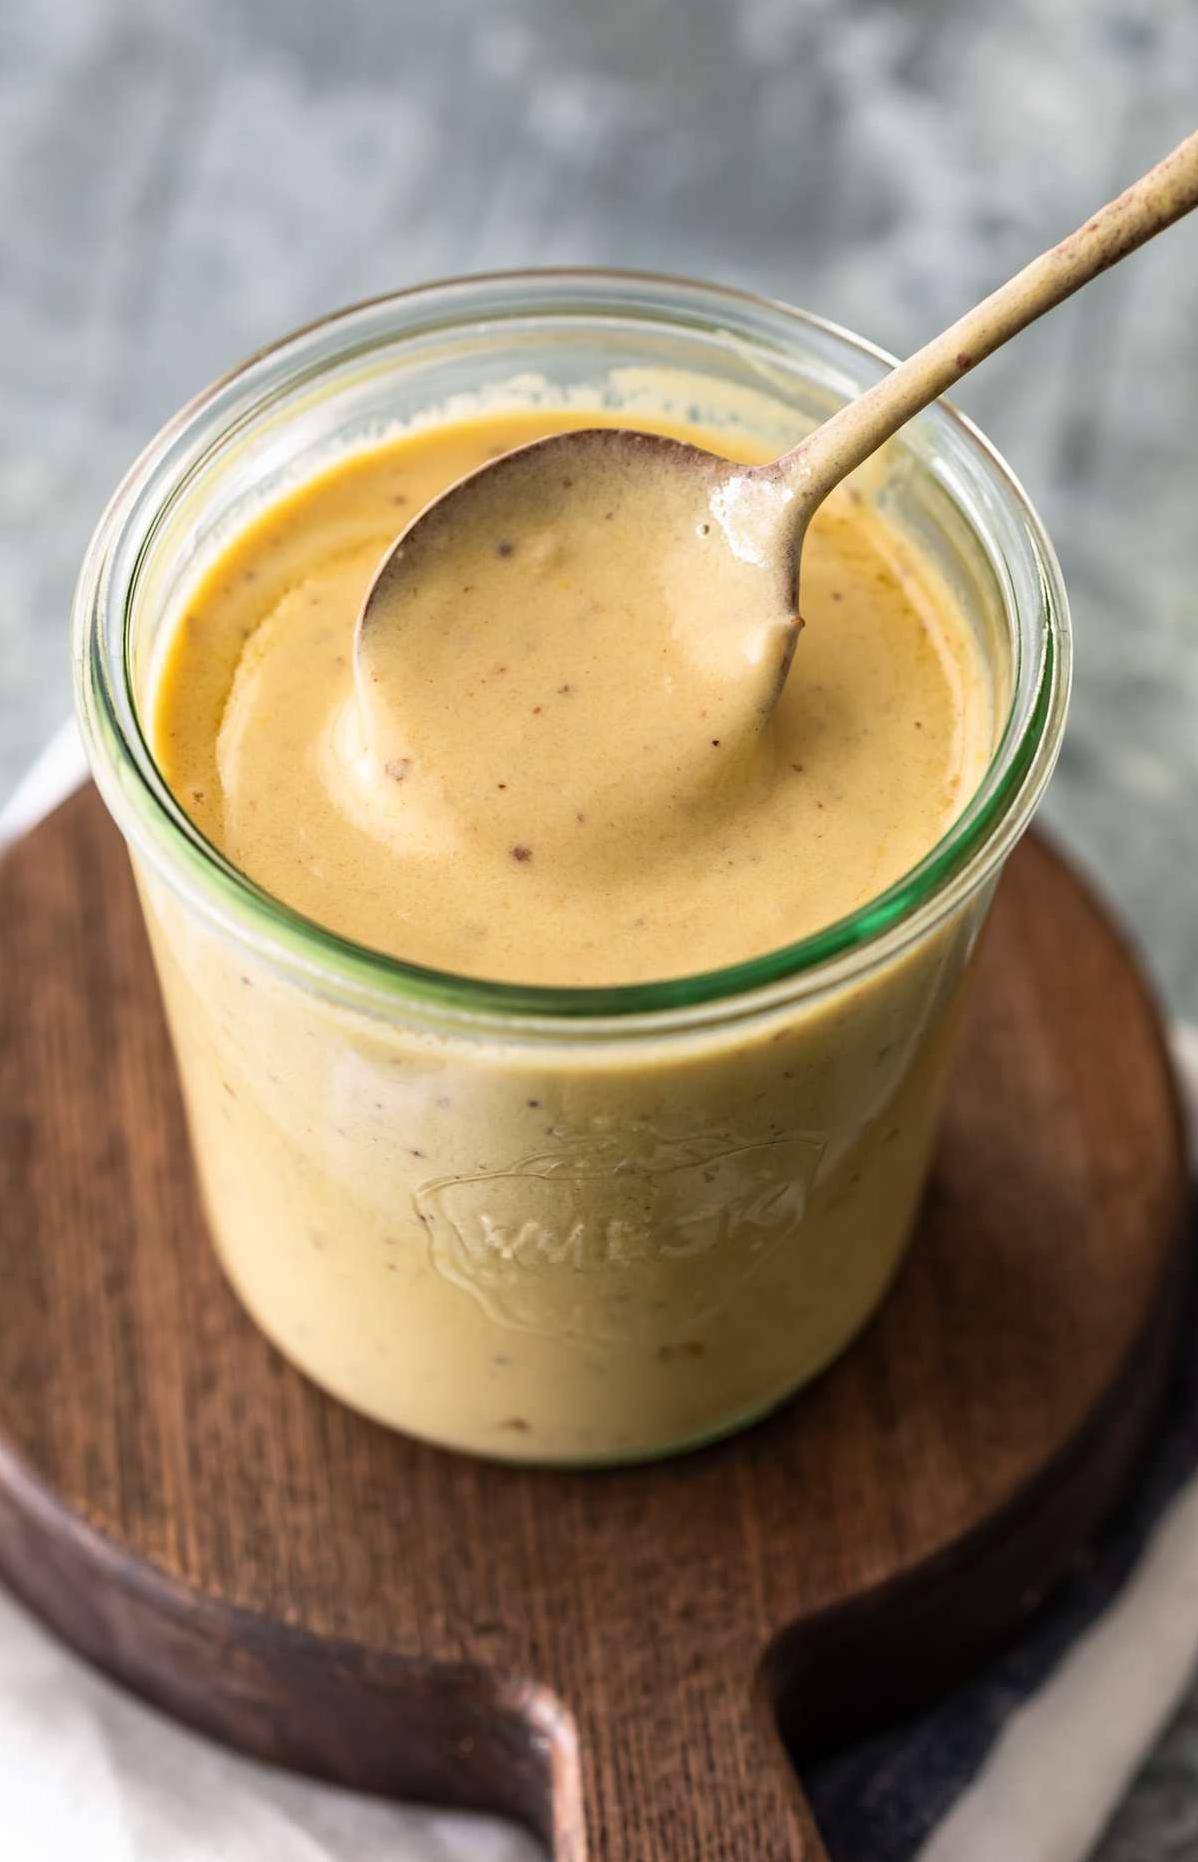  Looking for a zingy and tangy accompaniment to your favorite dish? English mustard sauce is here for you!